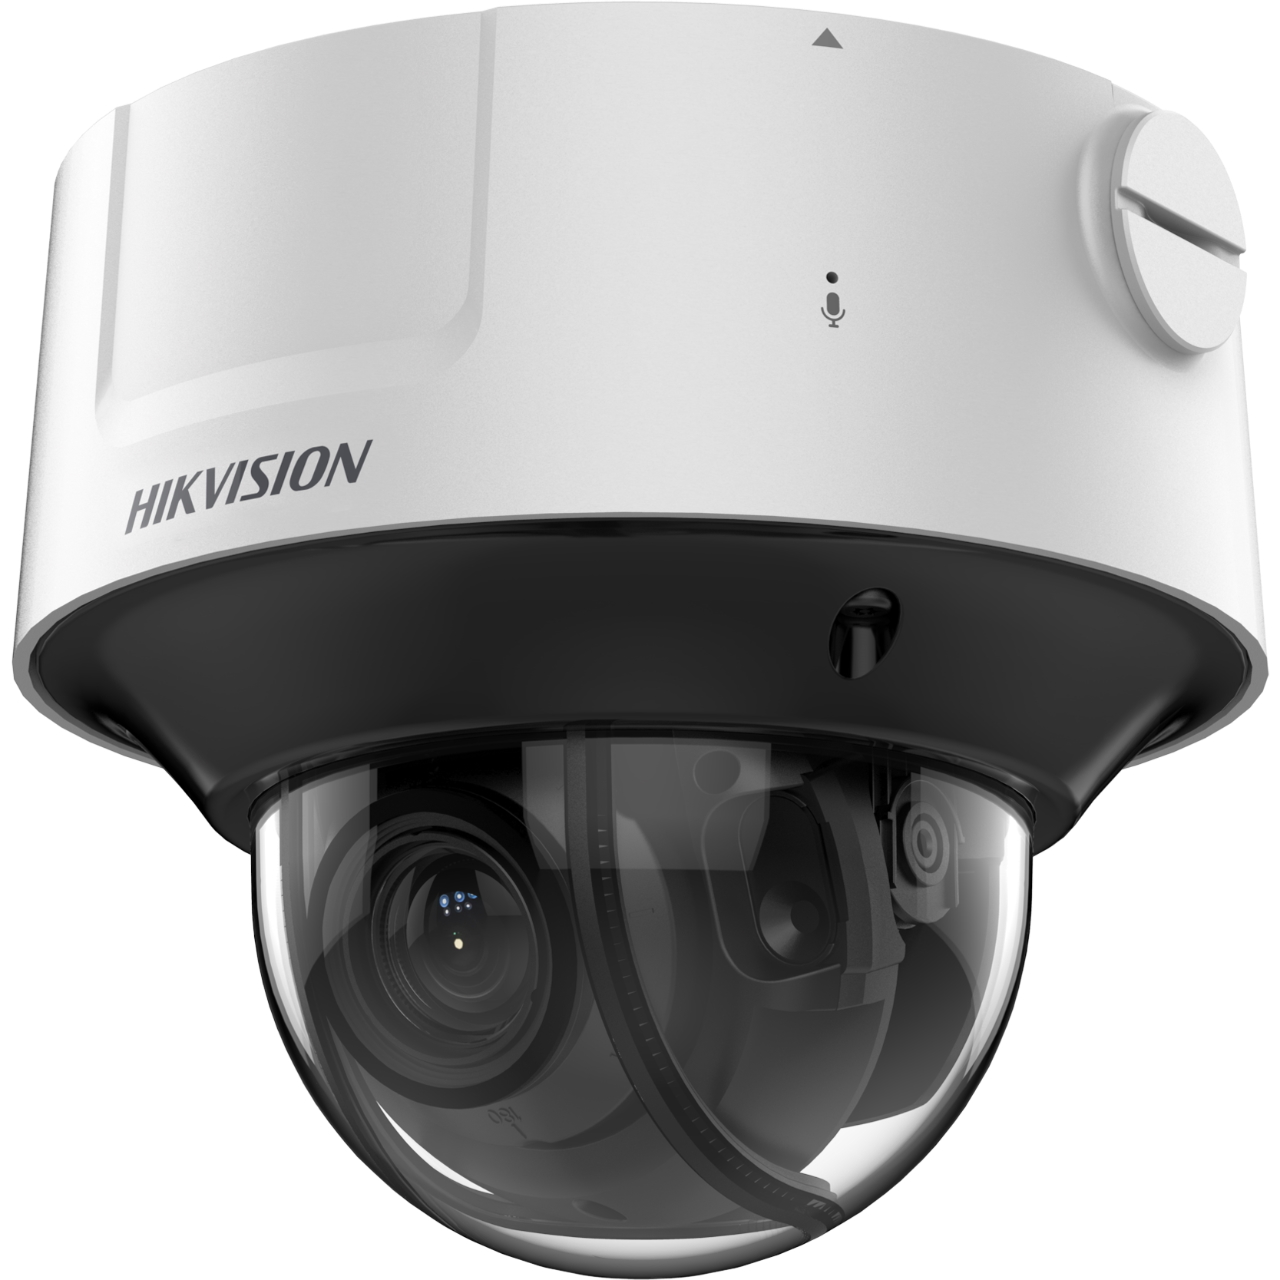 20001179 Hikvision DeeipinView camera dome 12P , varifocale, 2.8-12mm